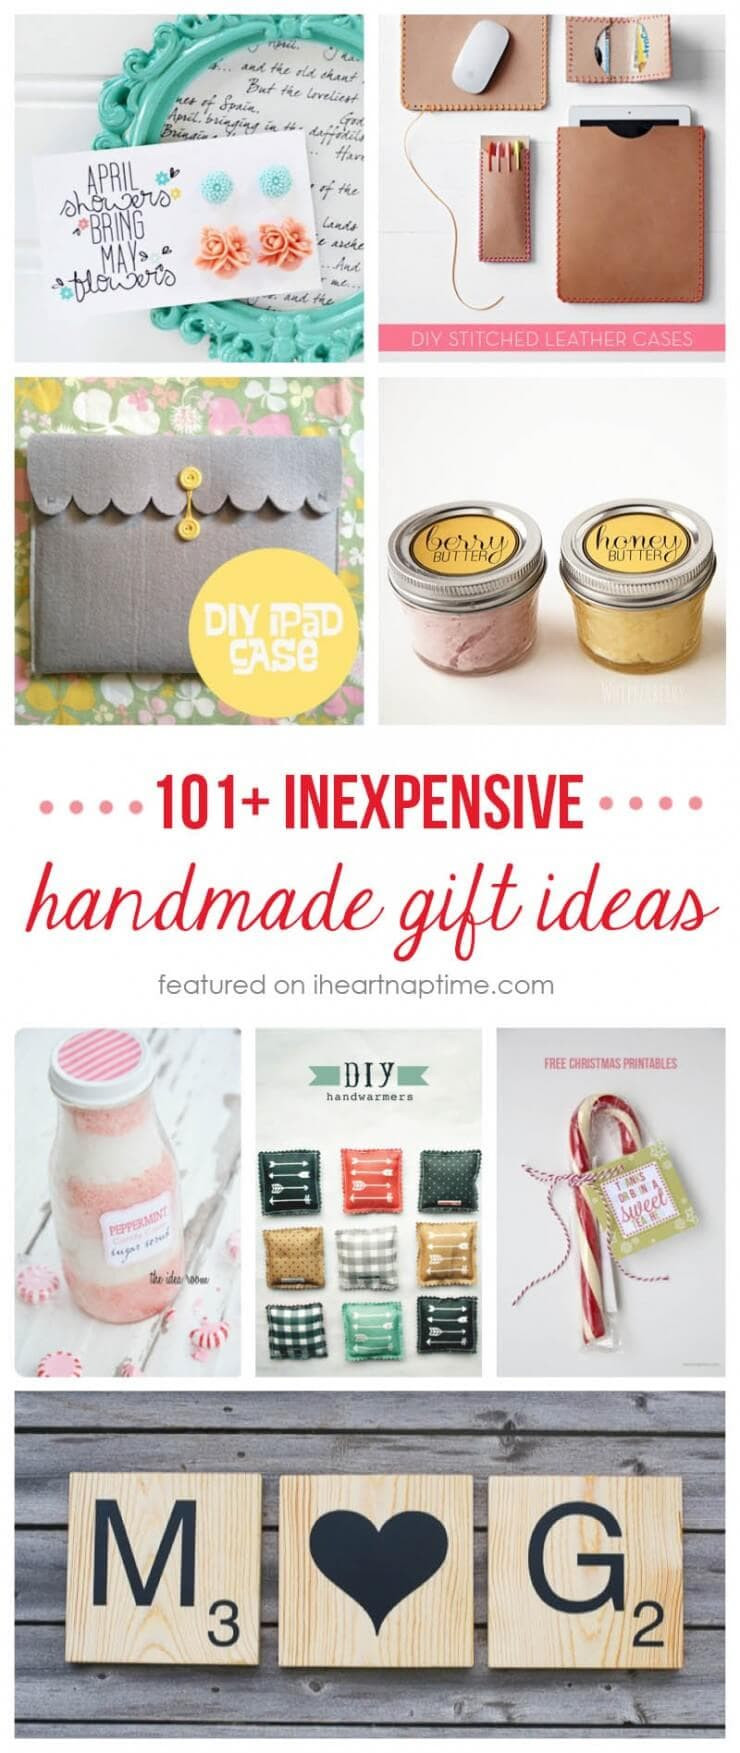 Cheap Homemade Christmas Gift Ideas
 50 homemade t ideas to make for under $5 I Heart Nap Time